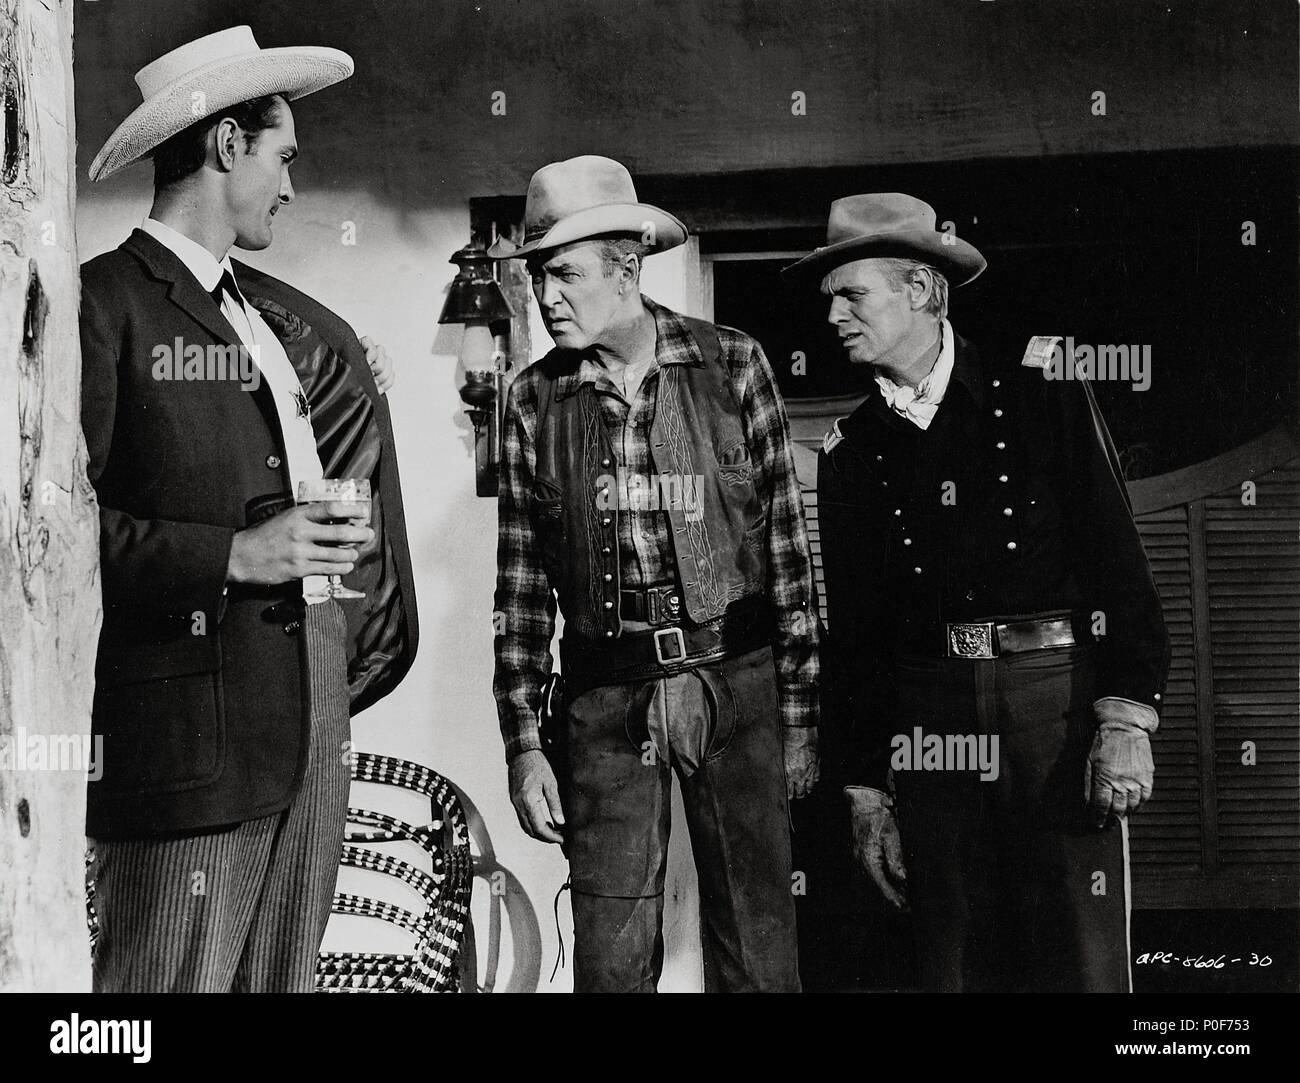 Original Film Title: TWO RODE TOGETHER. English Title: TWO RODE TOGETHER.  Film Director: JOHN FORD. Year: 1961. Stars: JAMES STEWART; RICHARD  WIDMARK. Credit: COLUMBIA PICTURES / Album Stock Photo - Alamy